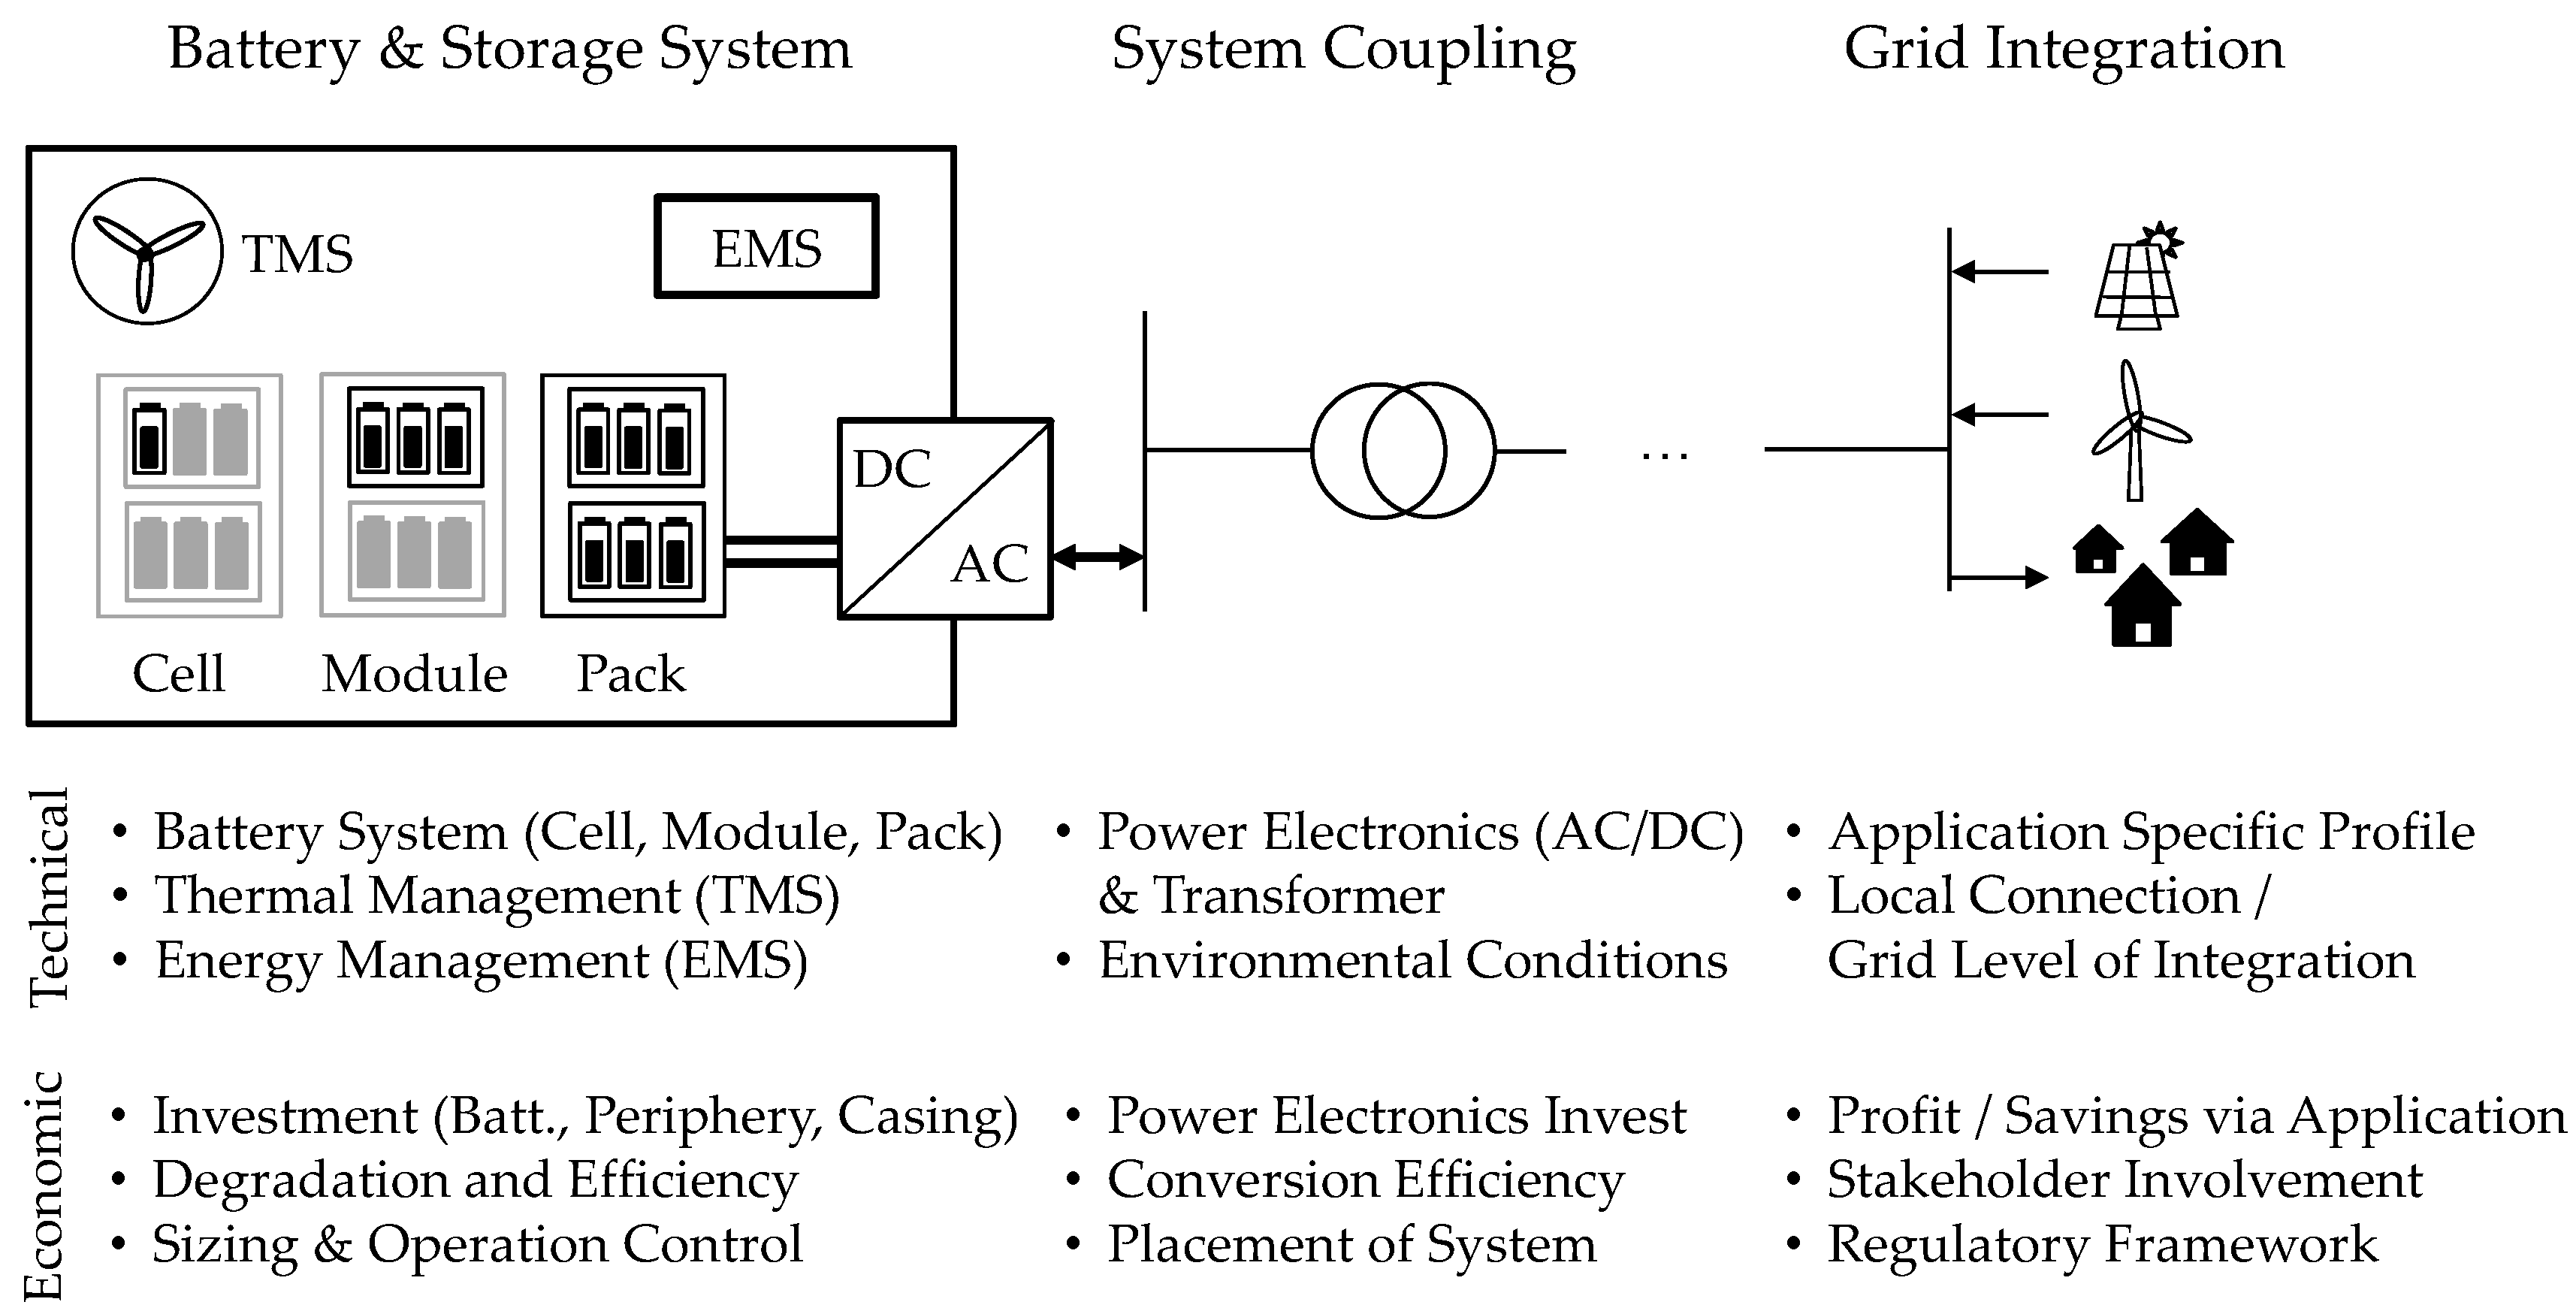 Energies | Free Full-Text | Lithium-Ion Battery Storage for the Grid—A  Review of Stationary Battery Storage System Design Tailored for  Applications in Modern Power Grids